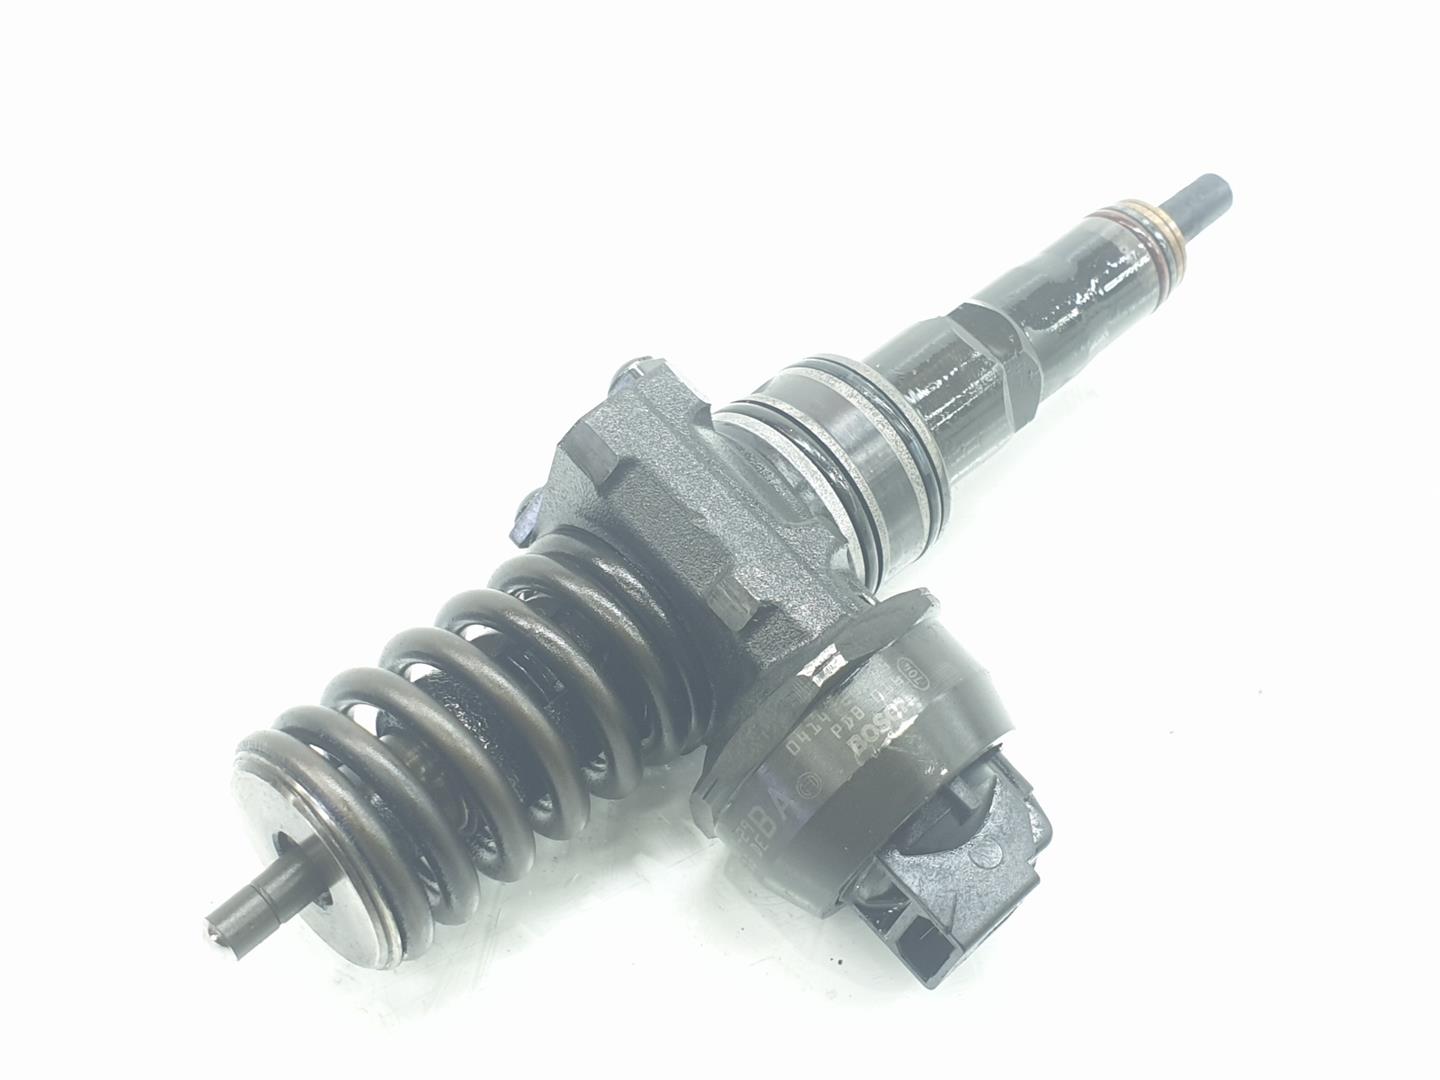 SEAT Ibiza 3 generation (2002-2008) Fuel Injector 038130073AG, 038130073AG, 1141CB 25100032